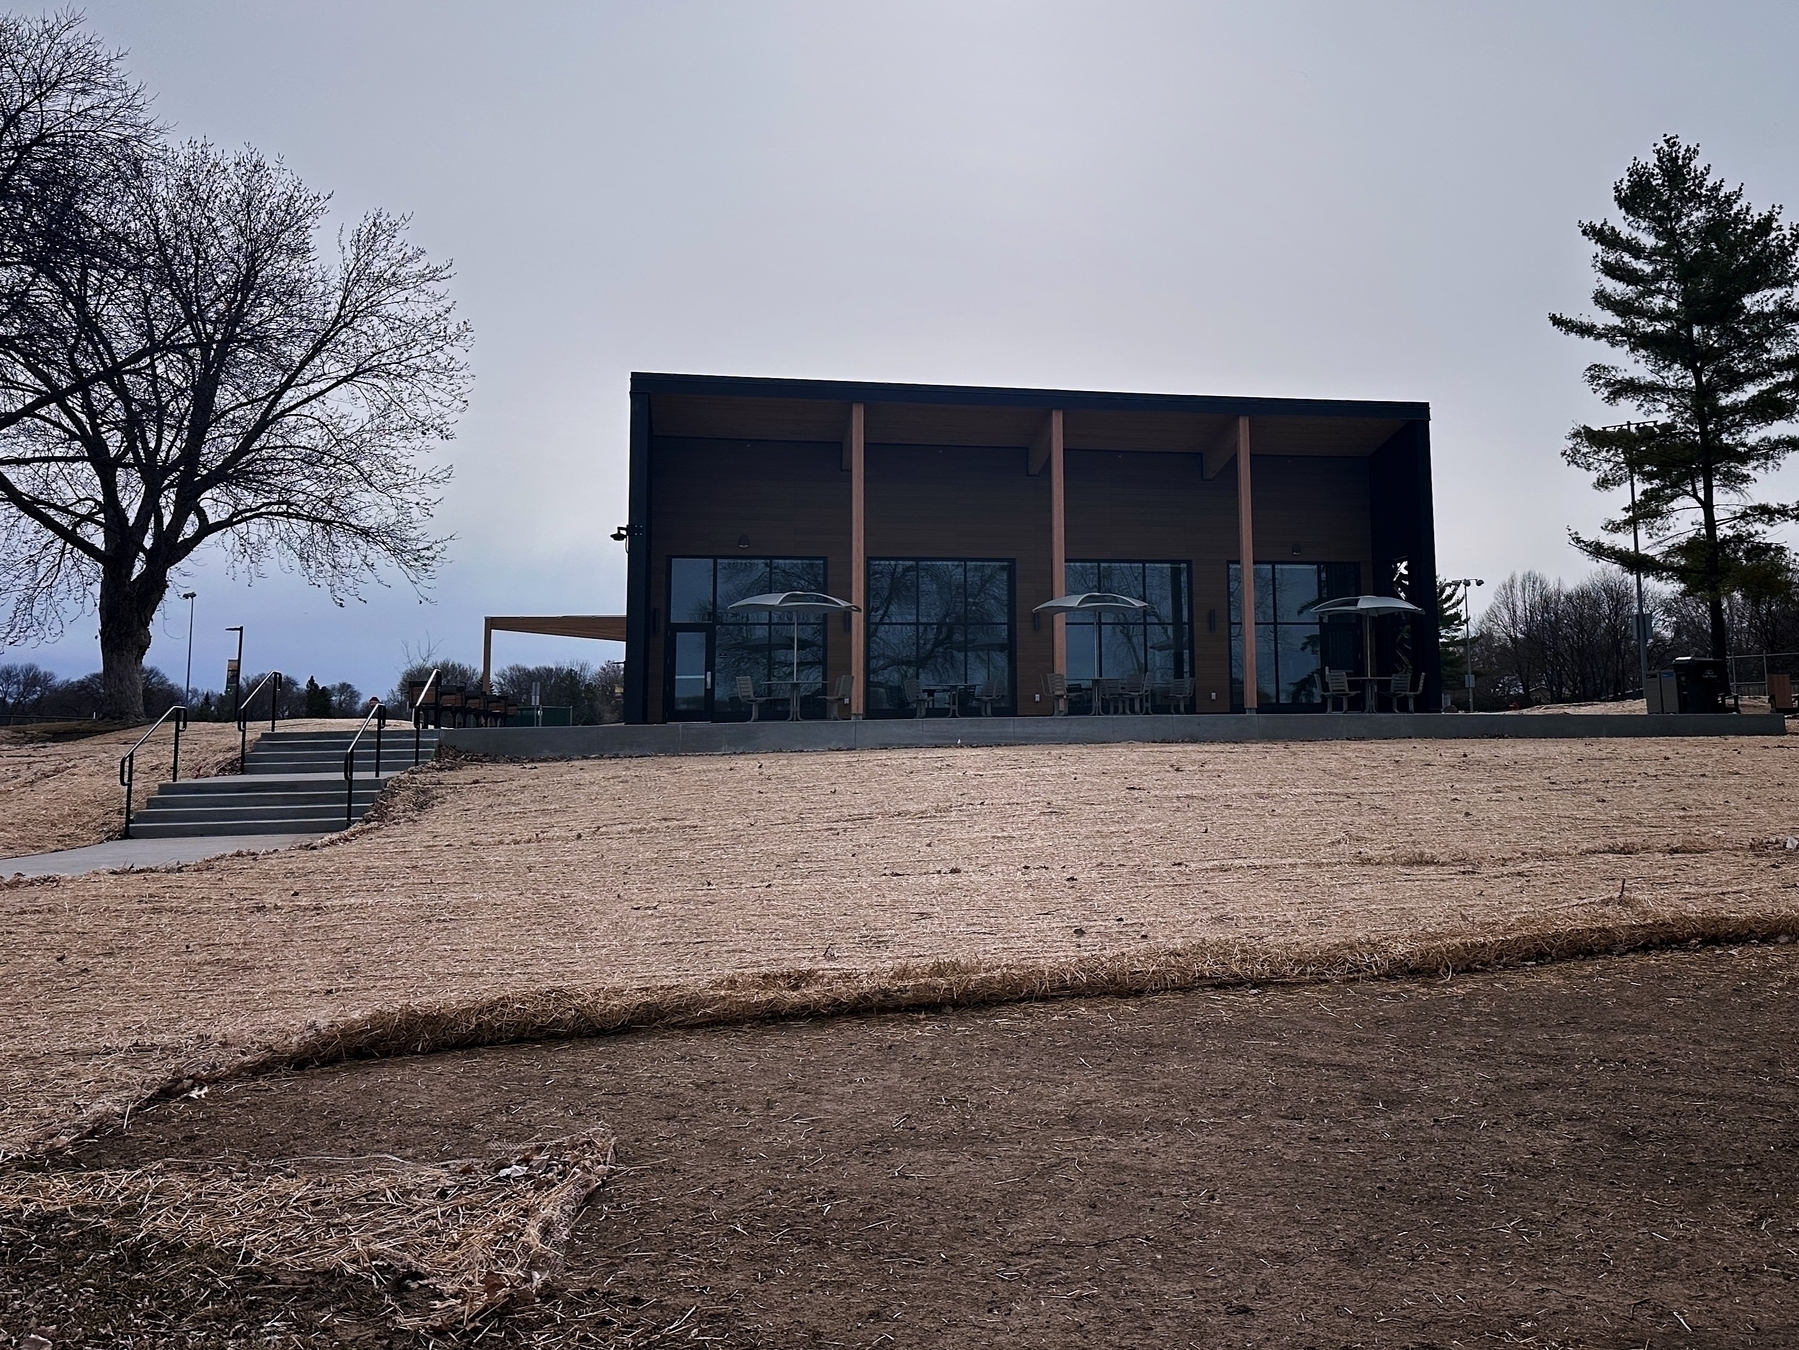 A modern building with large glass windows, a prominent wooden facade, and a sloped roof, nestled in a barren landscape with a leafless tree to the left and a pine tree to the right. A concrete pathway with steps leads up to the building